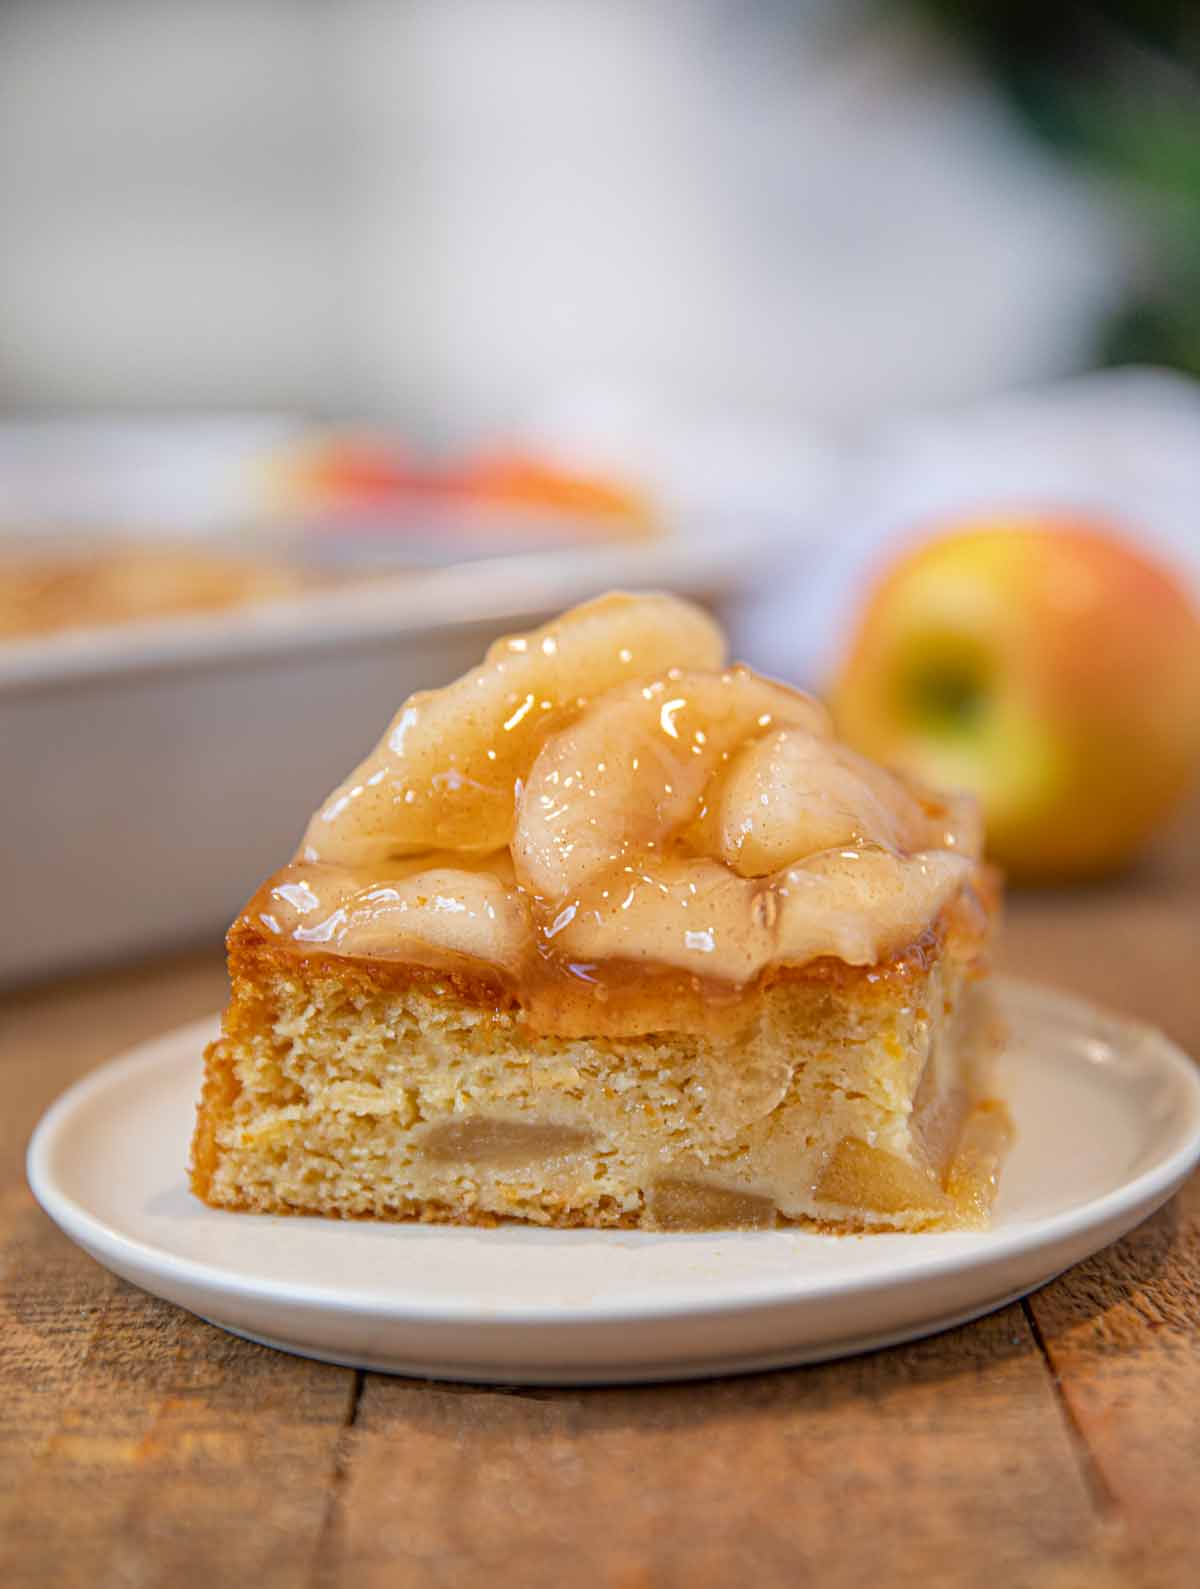 Apple Cake topped with Apple Pie Filling slice on plate